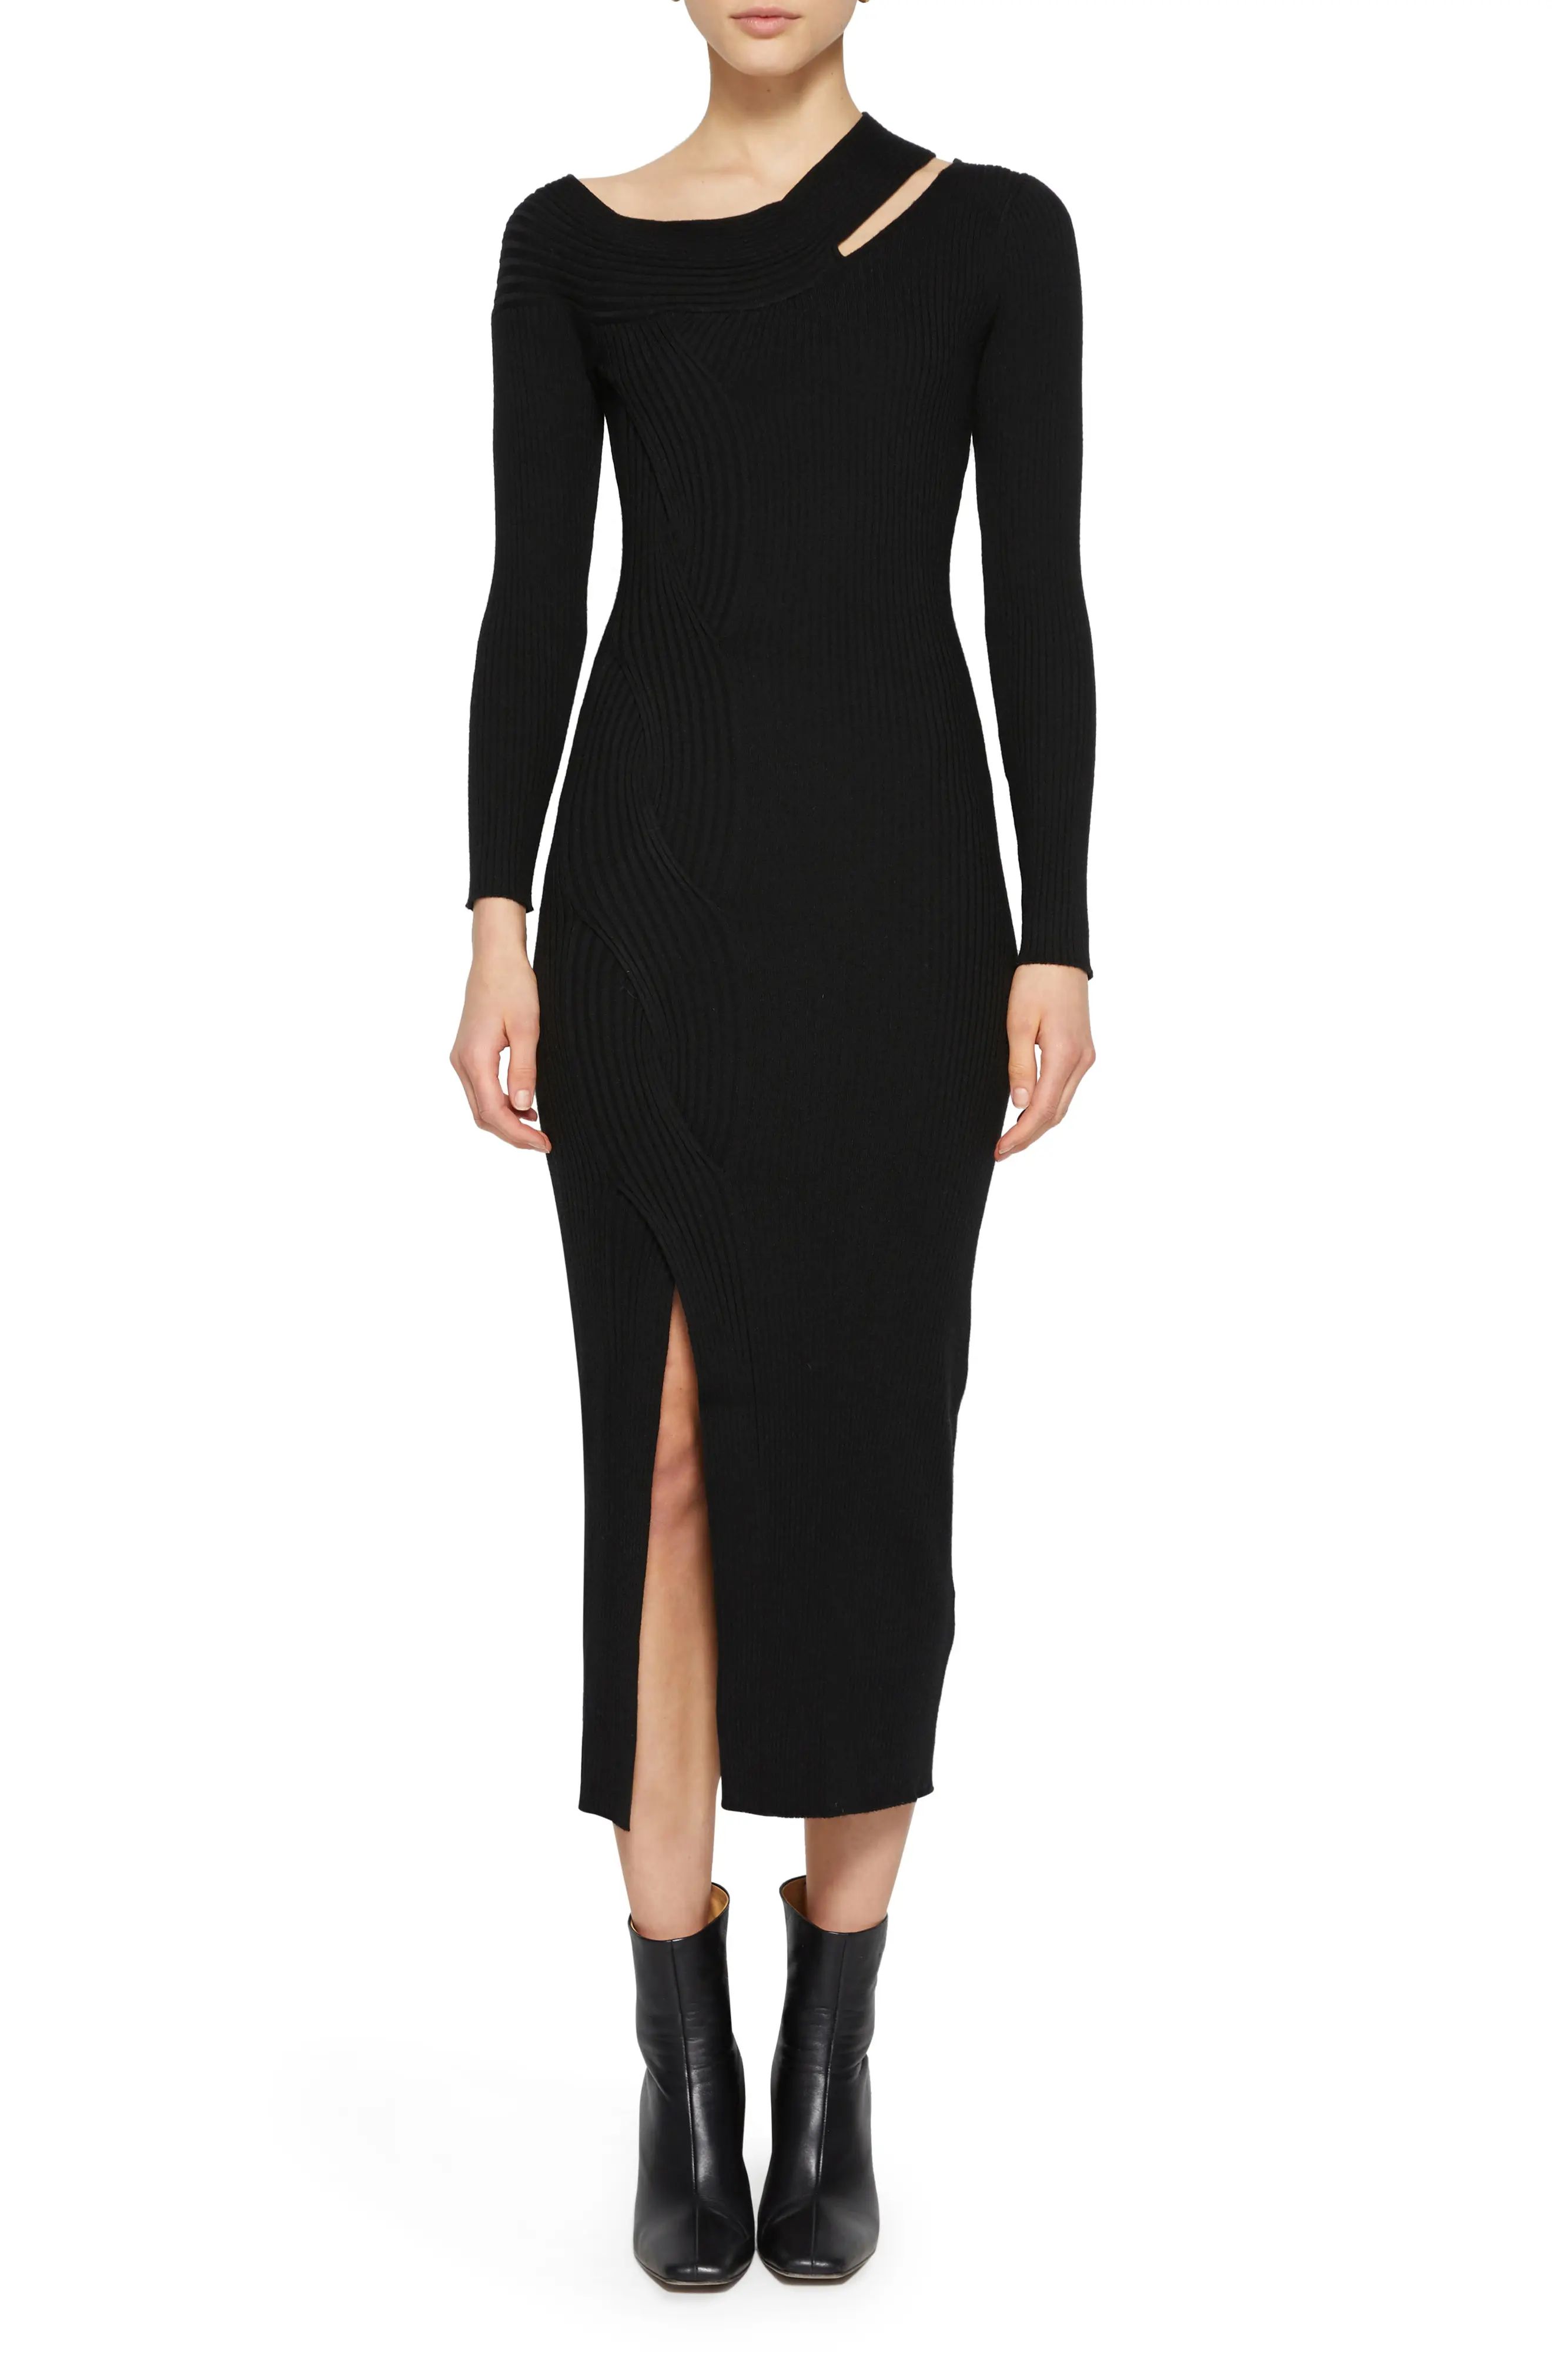 Jonathan Simkhai Ribbed Cutout Long Sleeve Sweater Dress, Size Small in Black at Nordstrom | Nordstrom